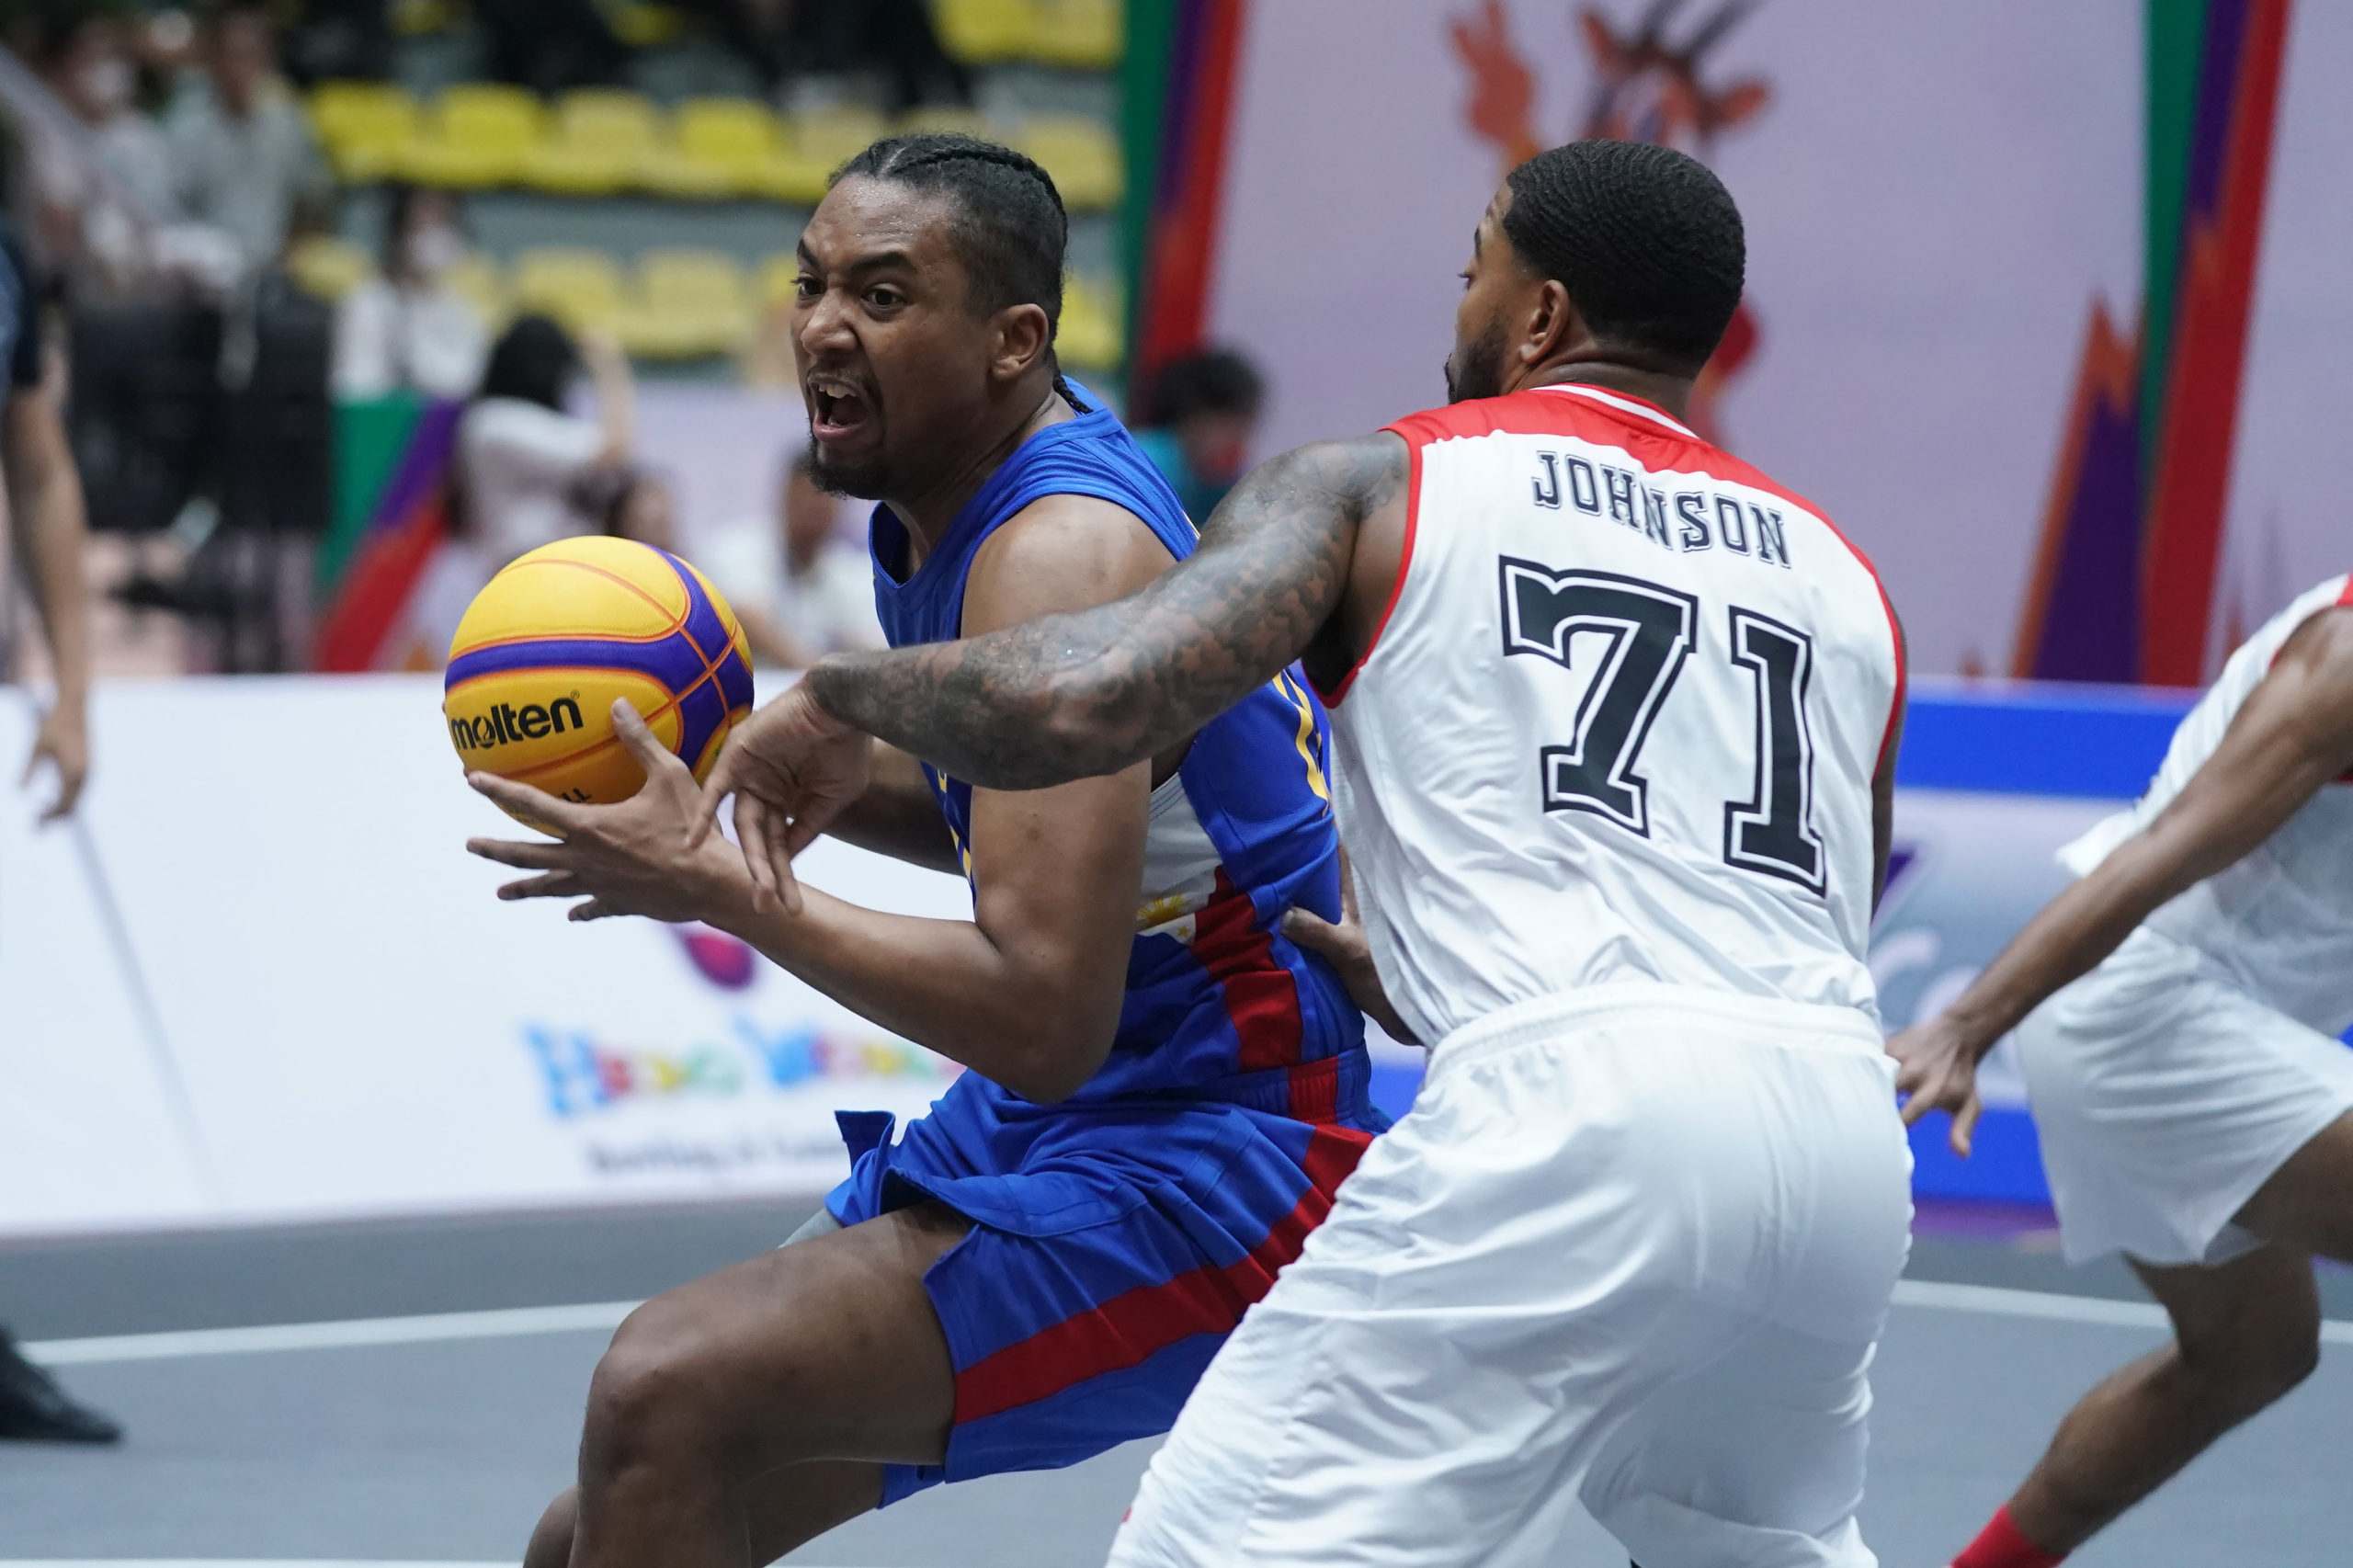 Brandon Ganuelas-Rosser (left) in action during the men’s 3x3 basketball event of the SEA Games.